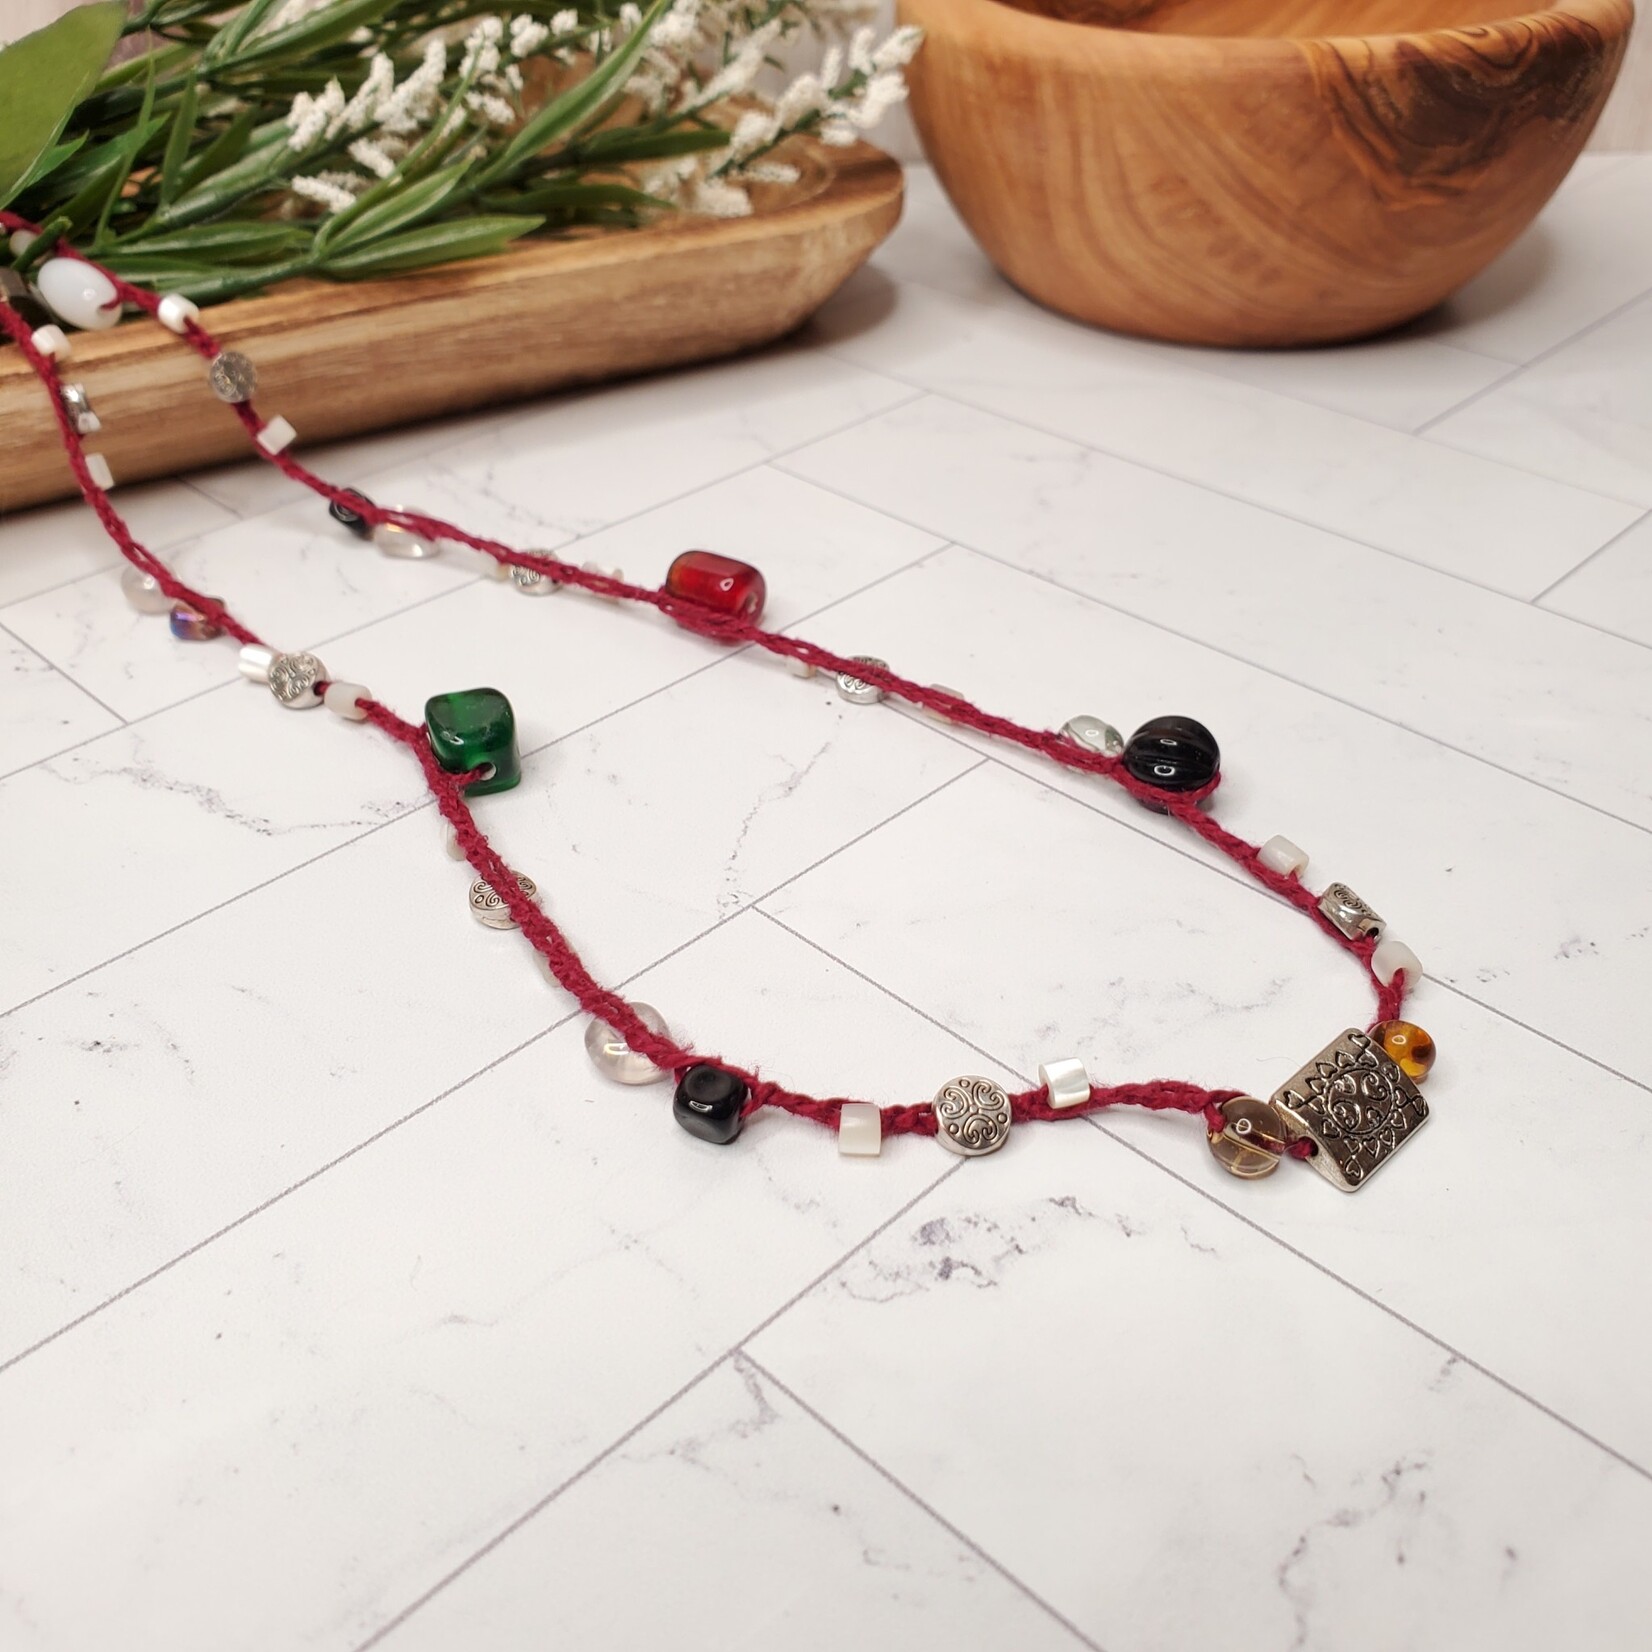 Crescent Moon Jewelry of the Sierras Bead Crochet Necklace- Cranberry & White - 34"